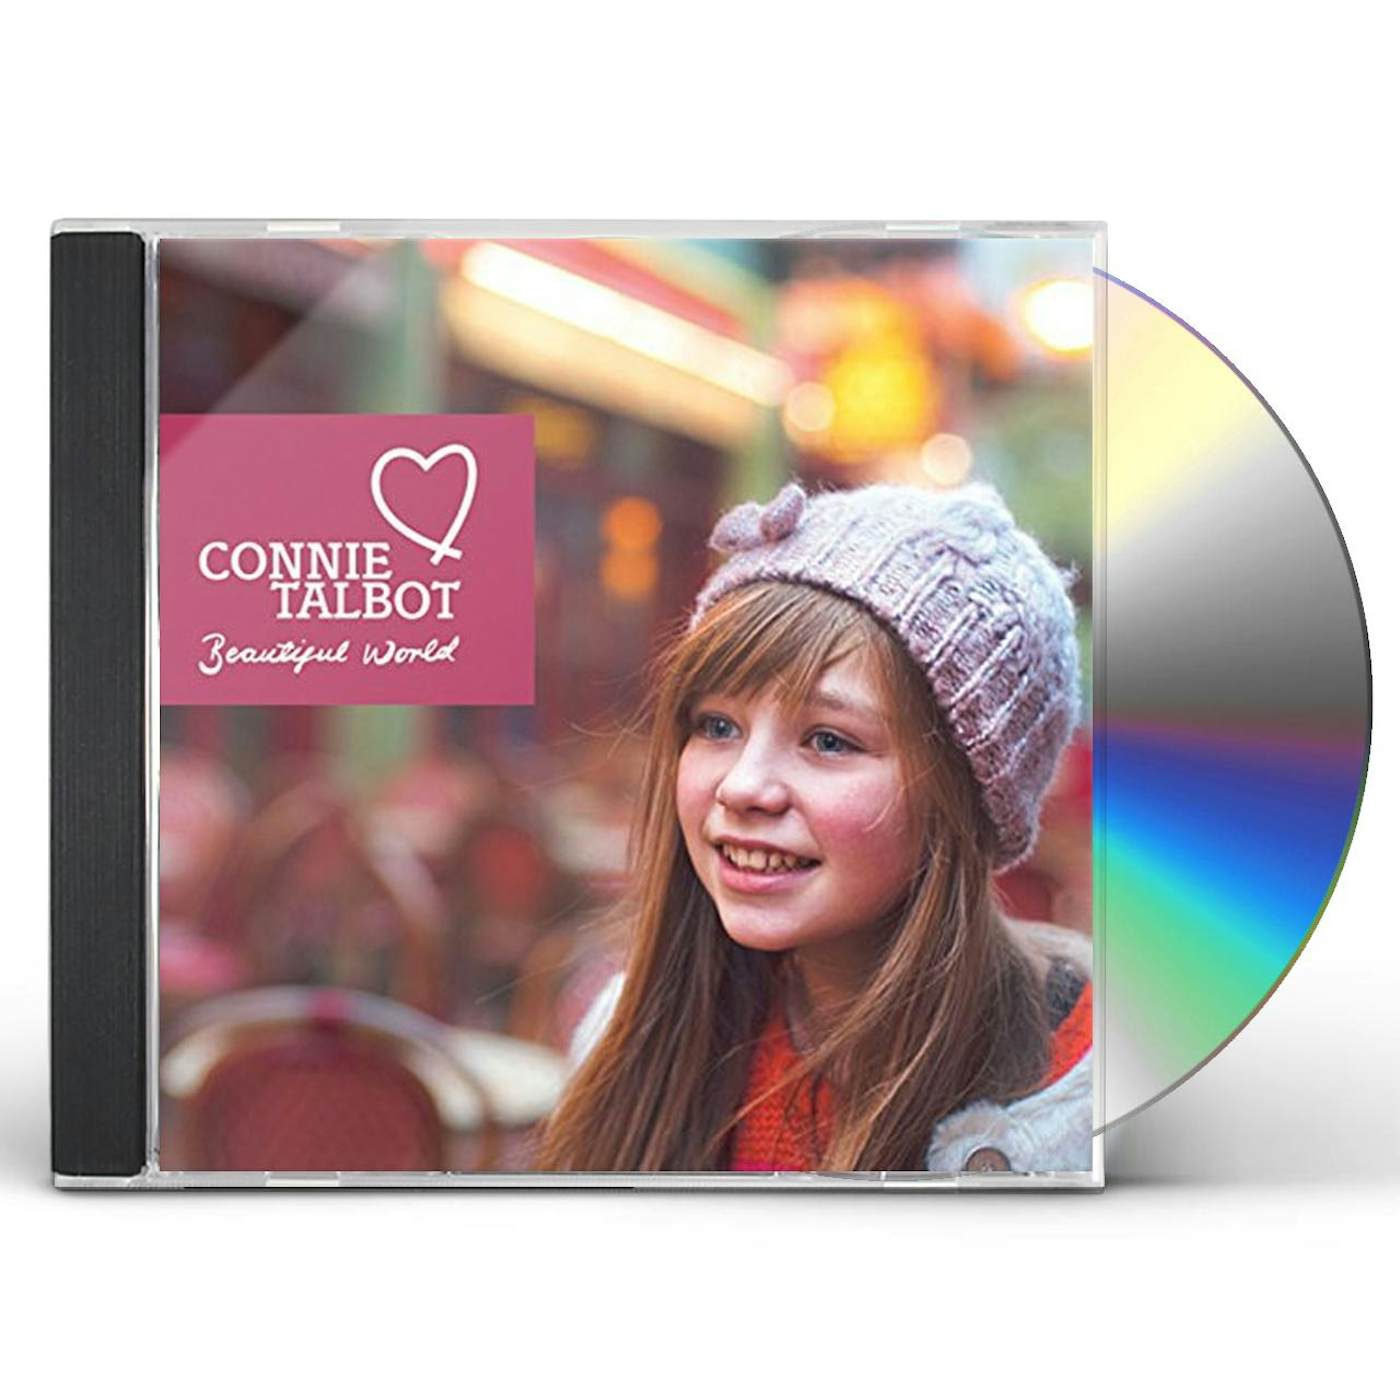 Connie Talbot - Count on Me  Connie's video of Count On Me from the album Beautiful  World Count On Me 來自小康妮 ─ 2012最新專輯 美麗新世界 Subscribe to Connie Talbot VEVO  channel 訂閱Connie